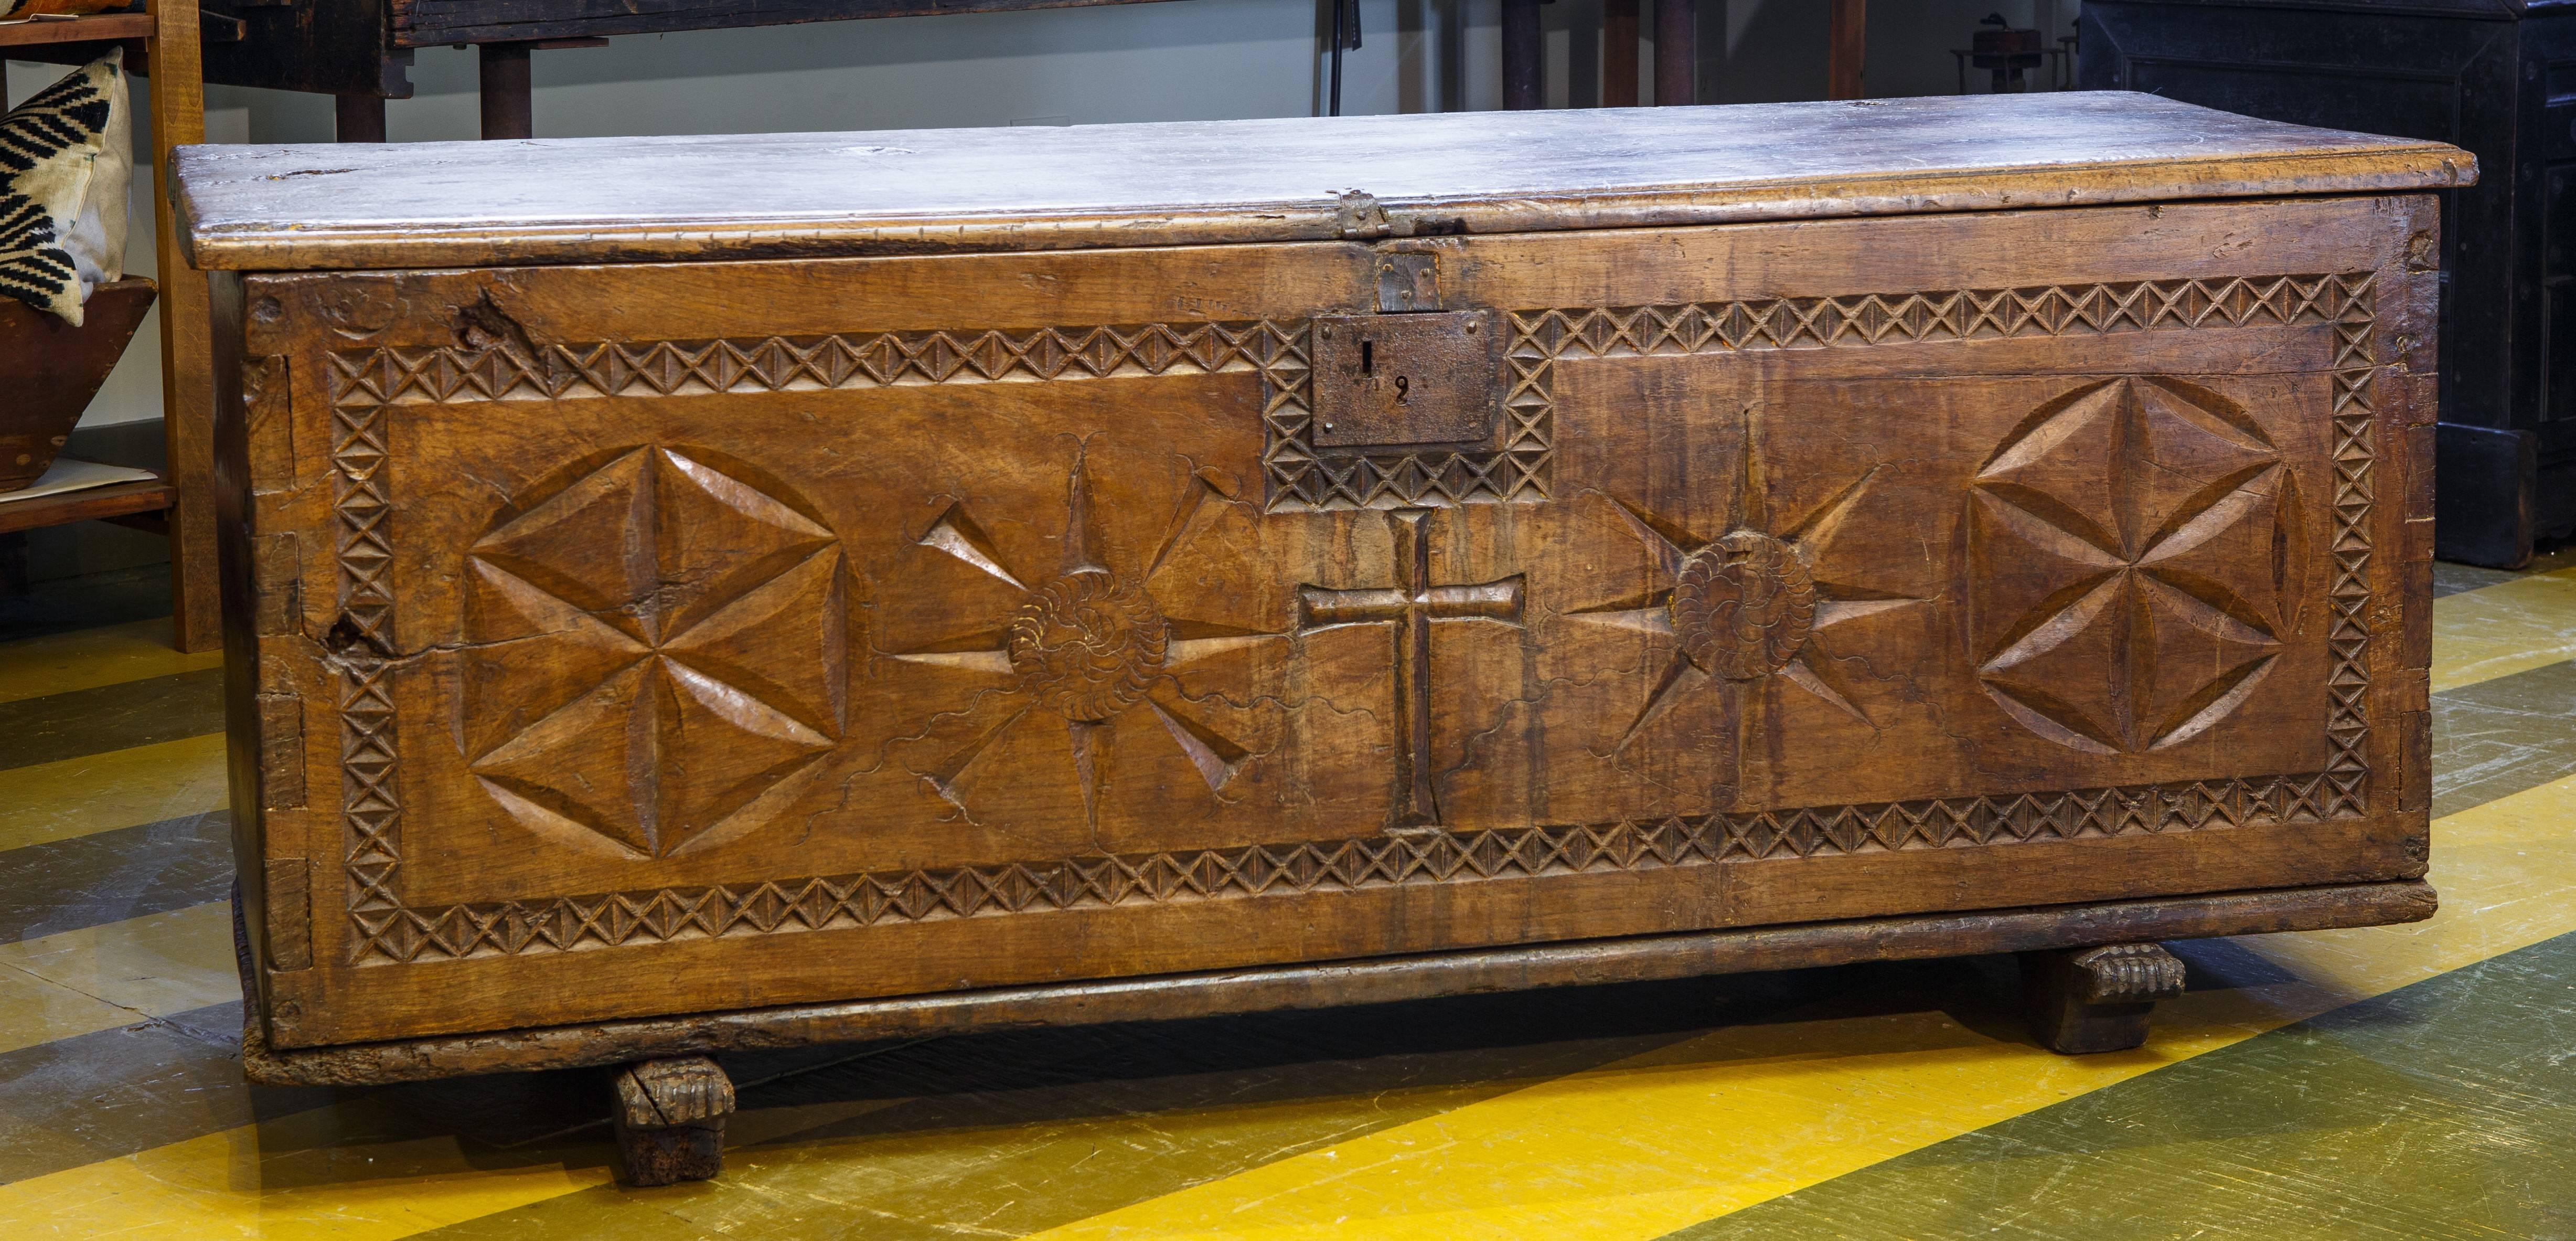 Hand-Carved Spanish Trunk/Chest with Wood-Hinged till and Original Forged Iron, circa 1680